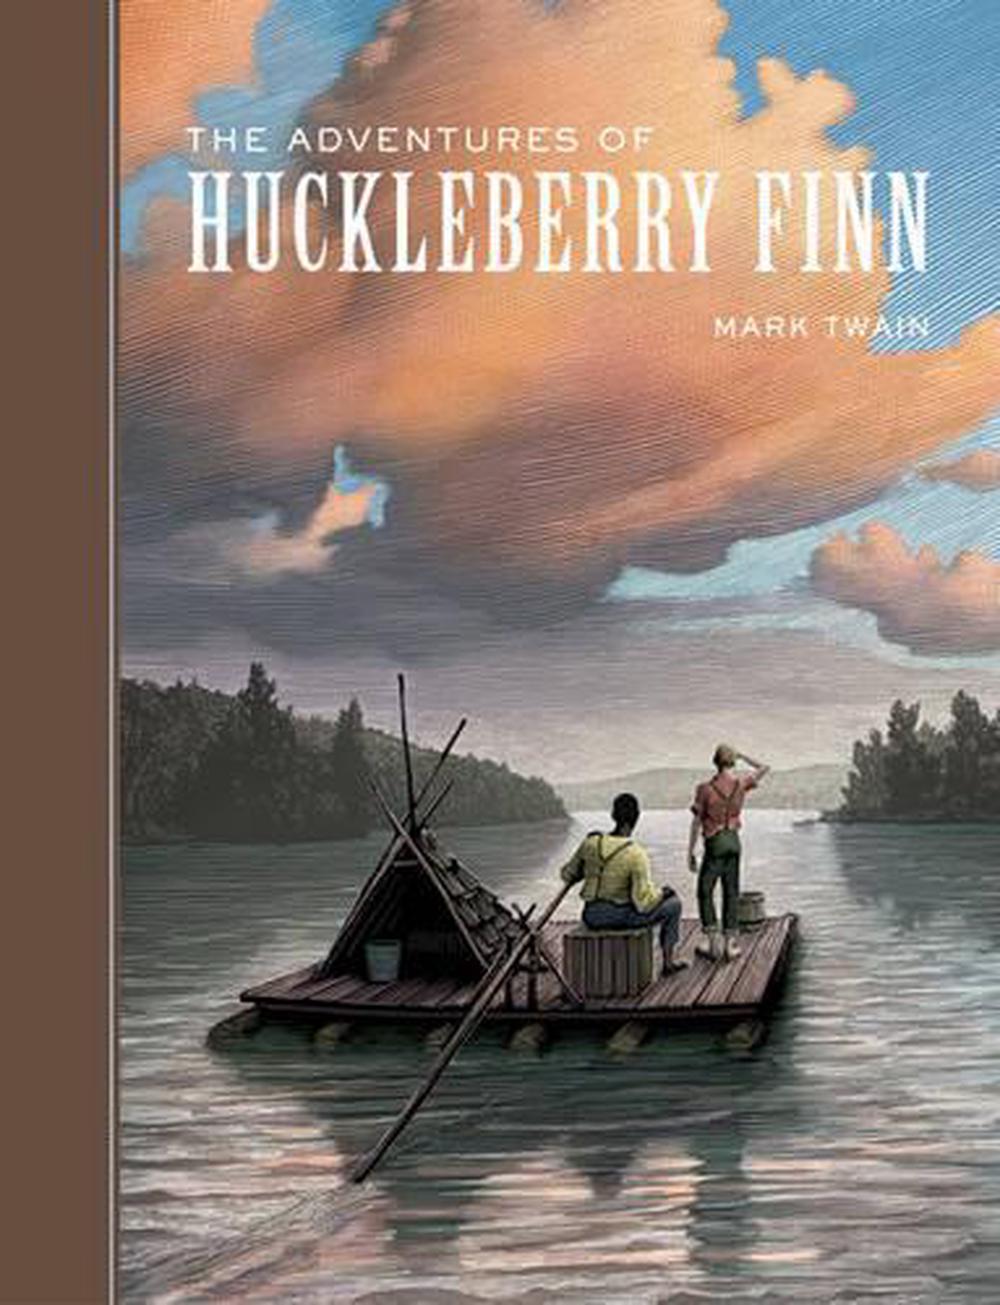 The Adventures of Huckleberry Finn download the new for apple